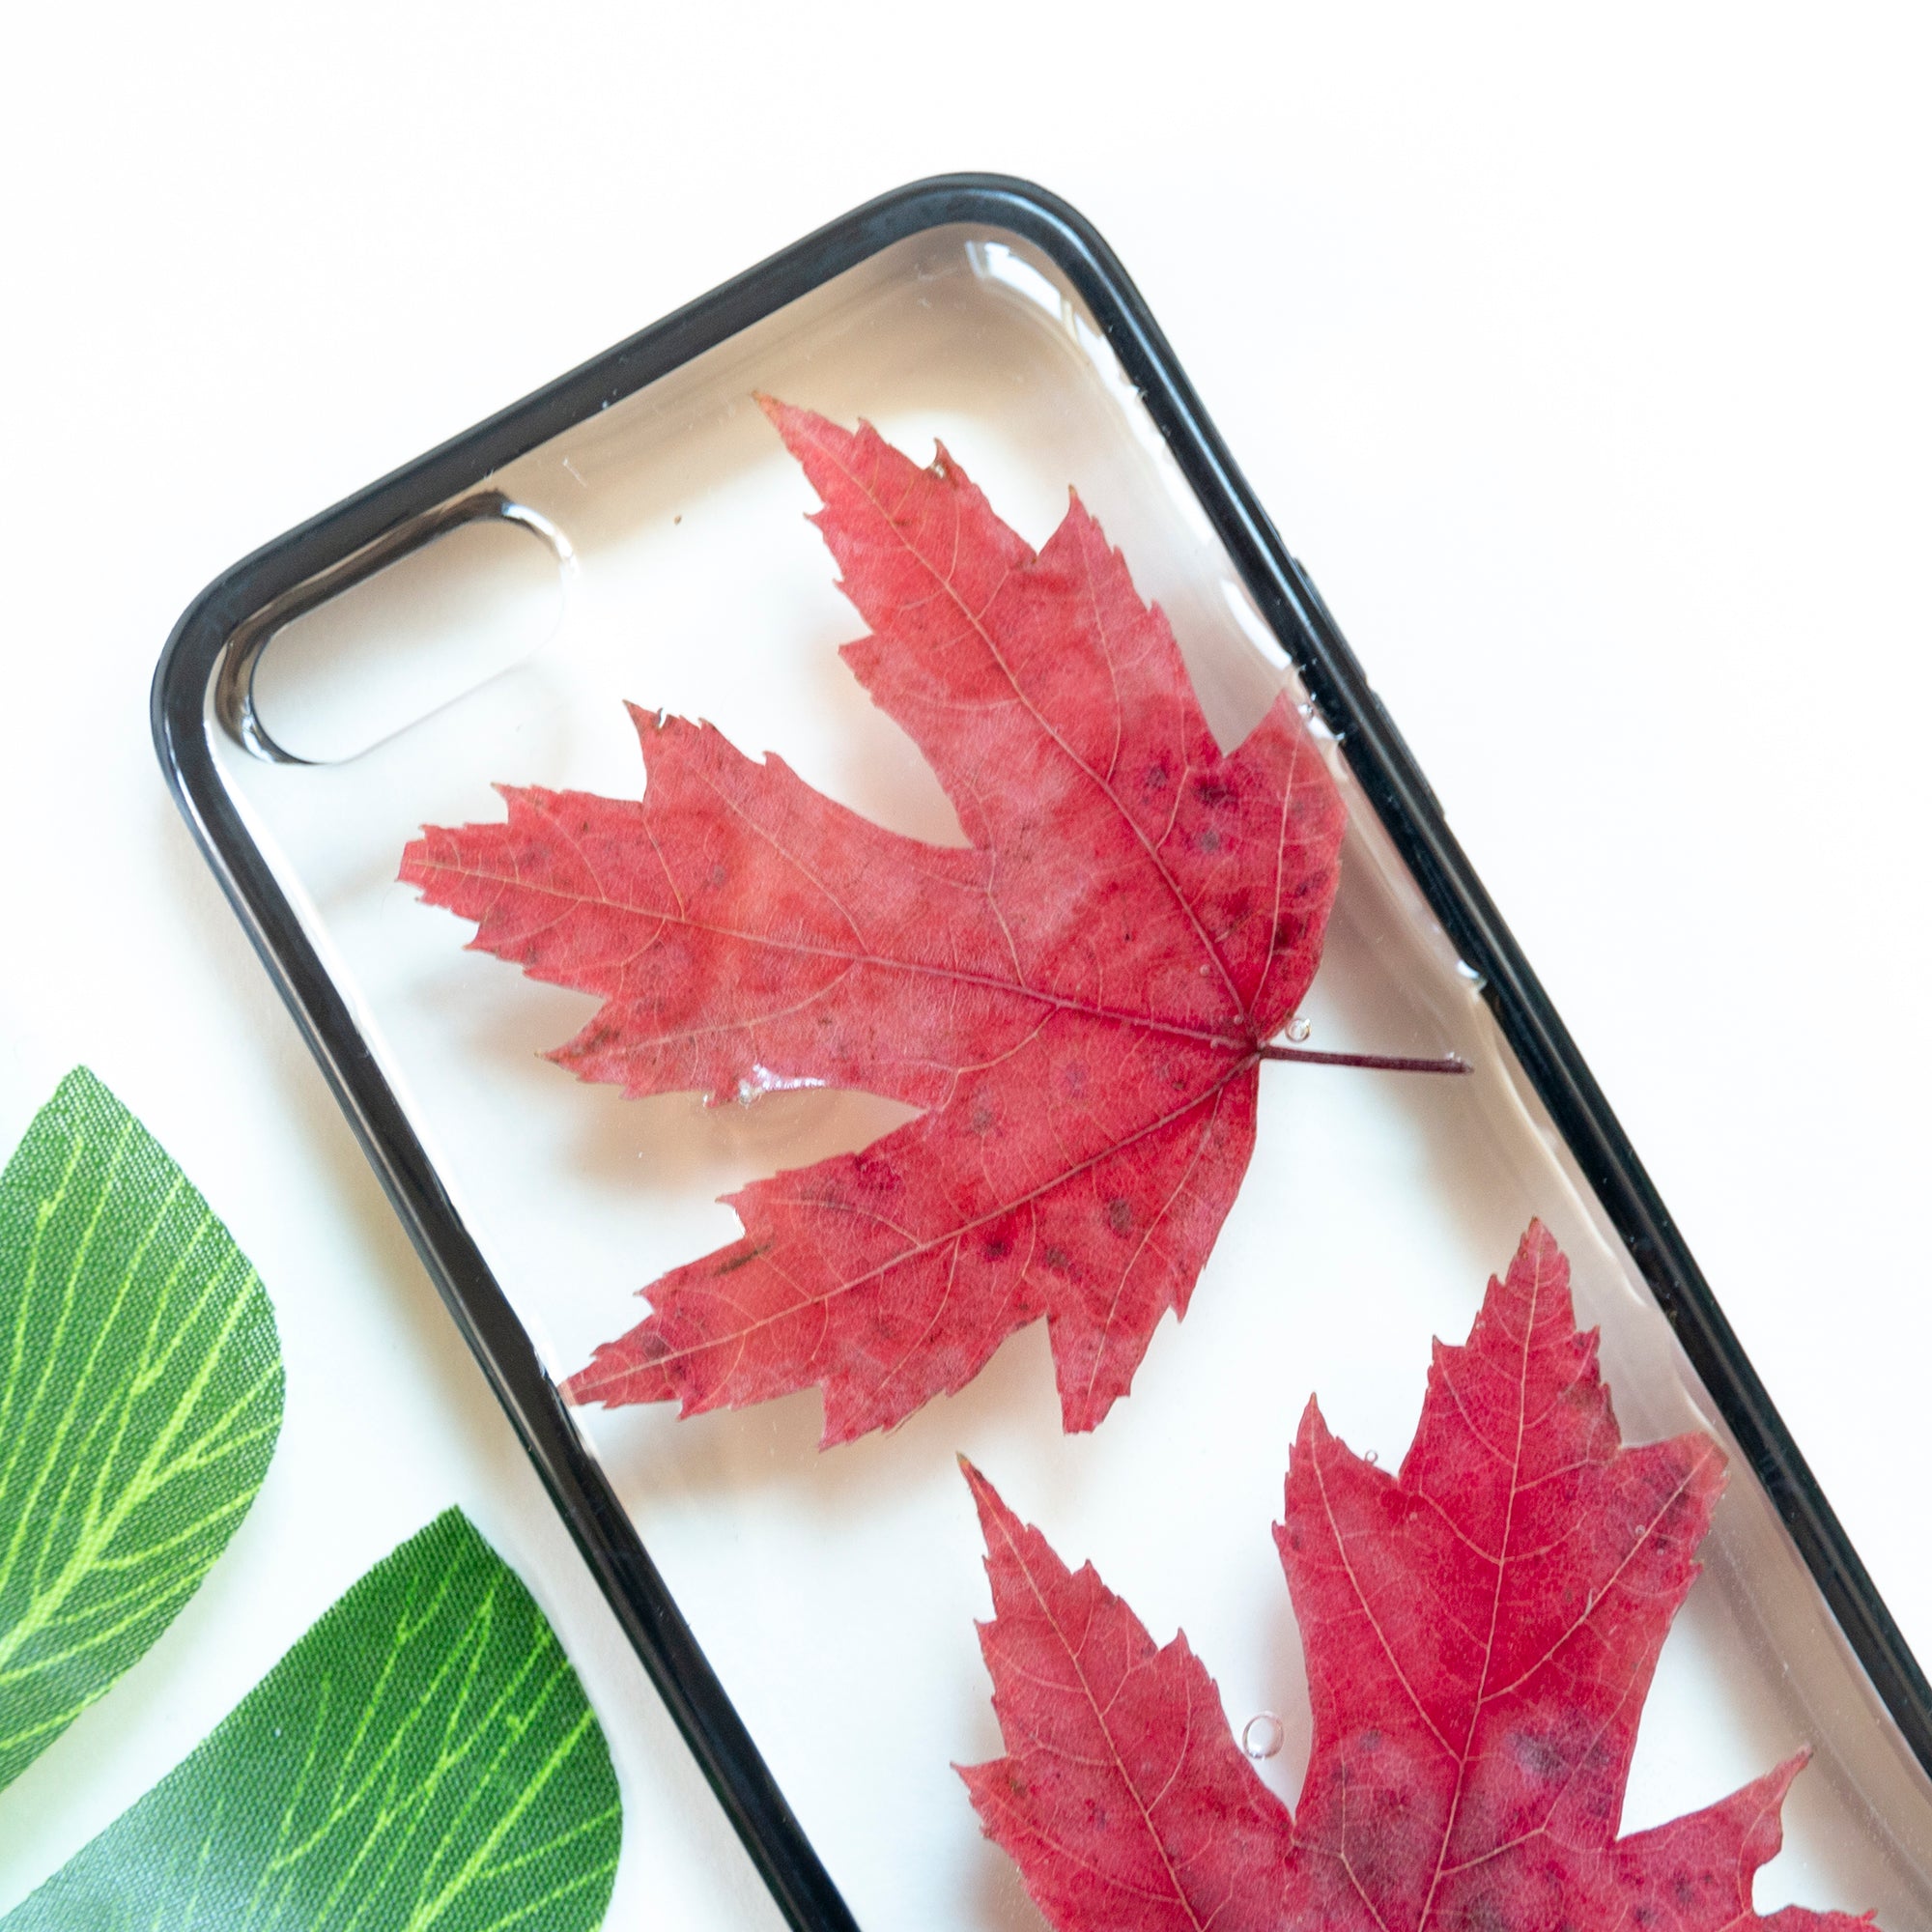 Floral Neverland Floralfy Fall Leaves Real Pressed Red Canadian Maple Leaf Flower Floral Foliage Botanical iPhone 5 5S SE Bumper Case 02